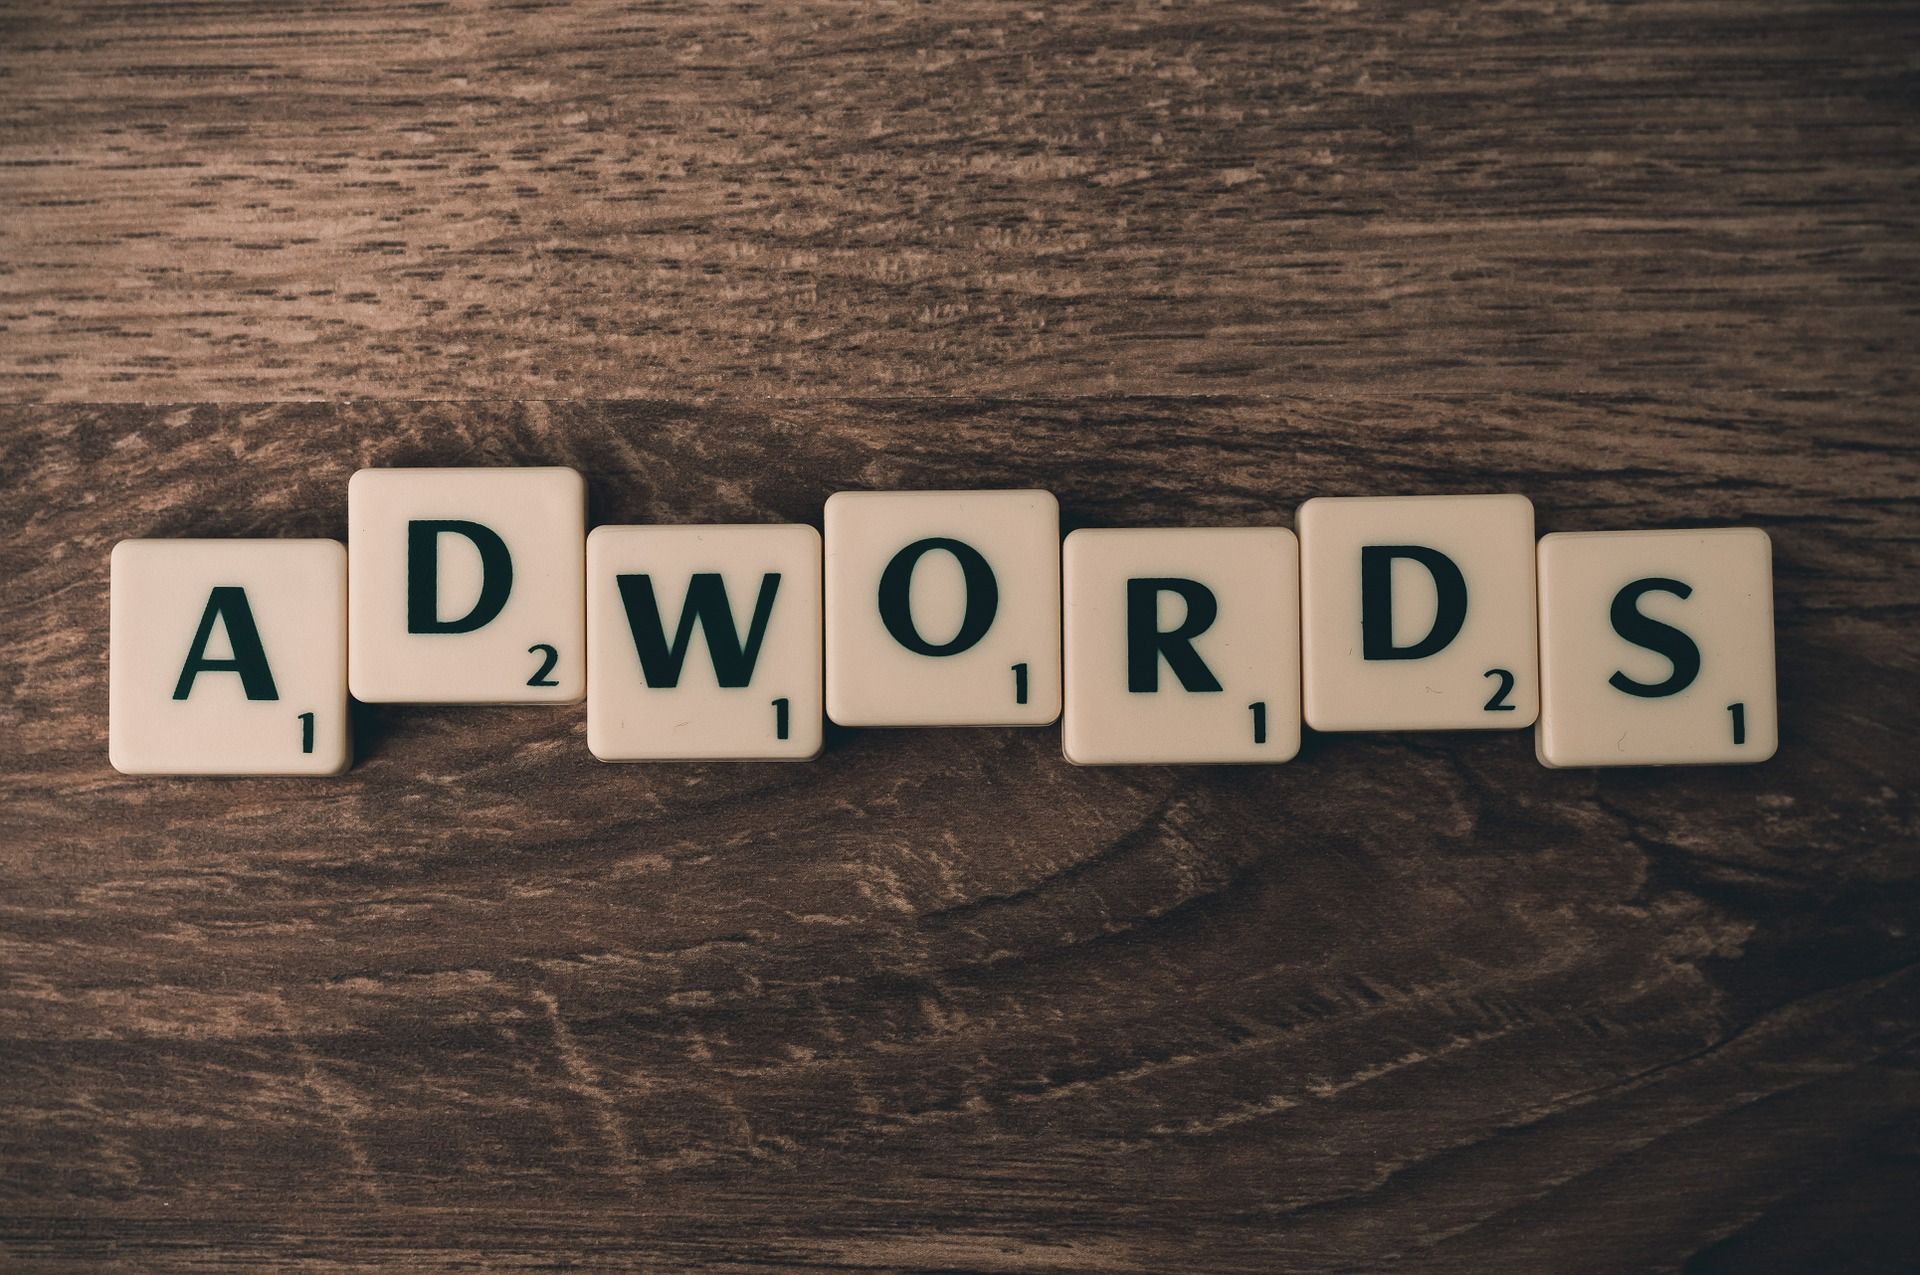 How To Submit a Google AdWords Trademark Violation Complaint?